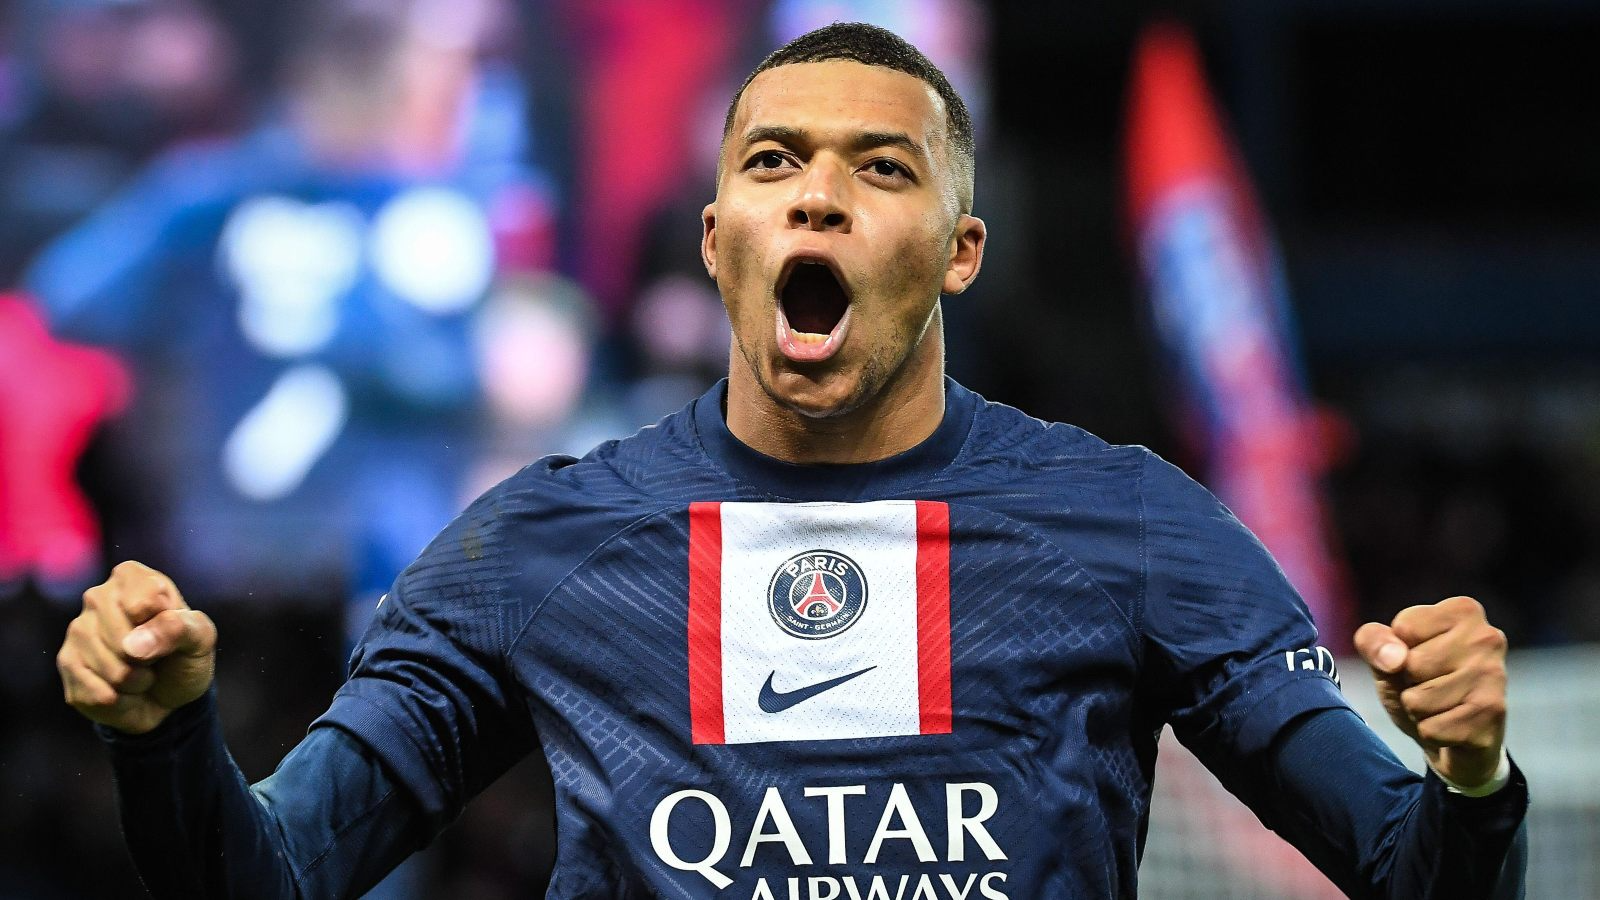 France to Make TV Series About Mbappe, May Show His Transfer to Real Madrid